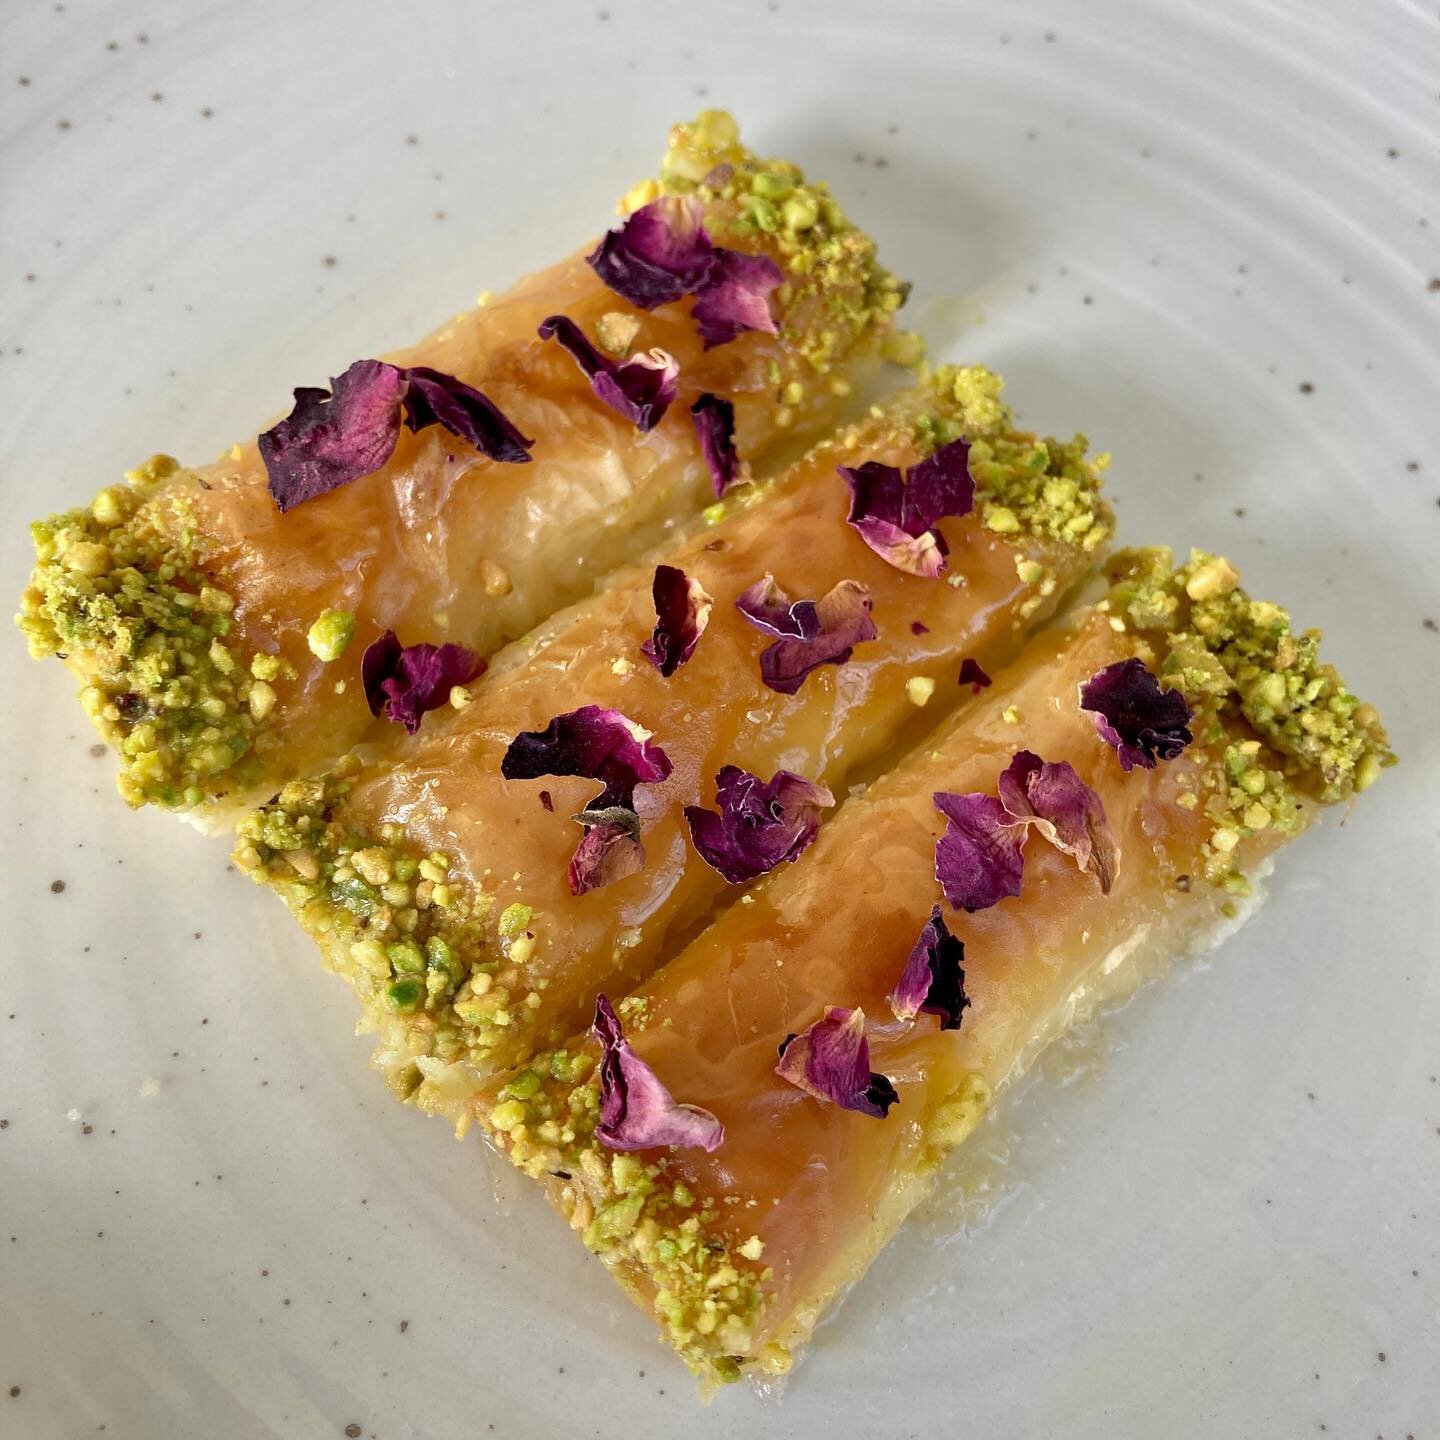 Welcome the newest addition to Binti&rsquo;s rotating menu: clotted cream fillo rolls 🤤 with or without edible rose petals. London meets Lebanon with these British clotted cream filled crispy fillo rolls covered with rose water and pistachio. Try so